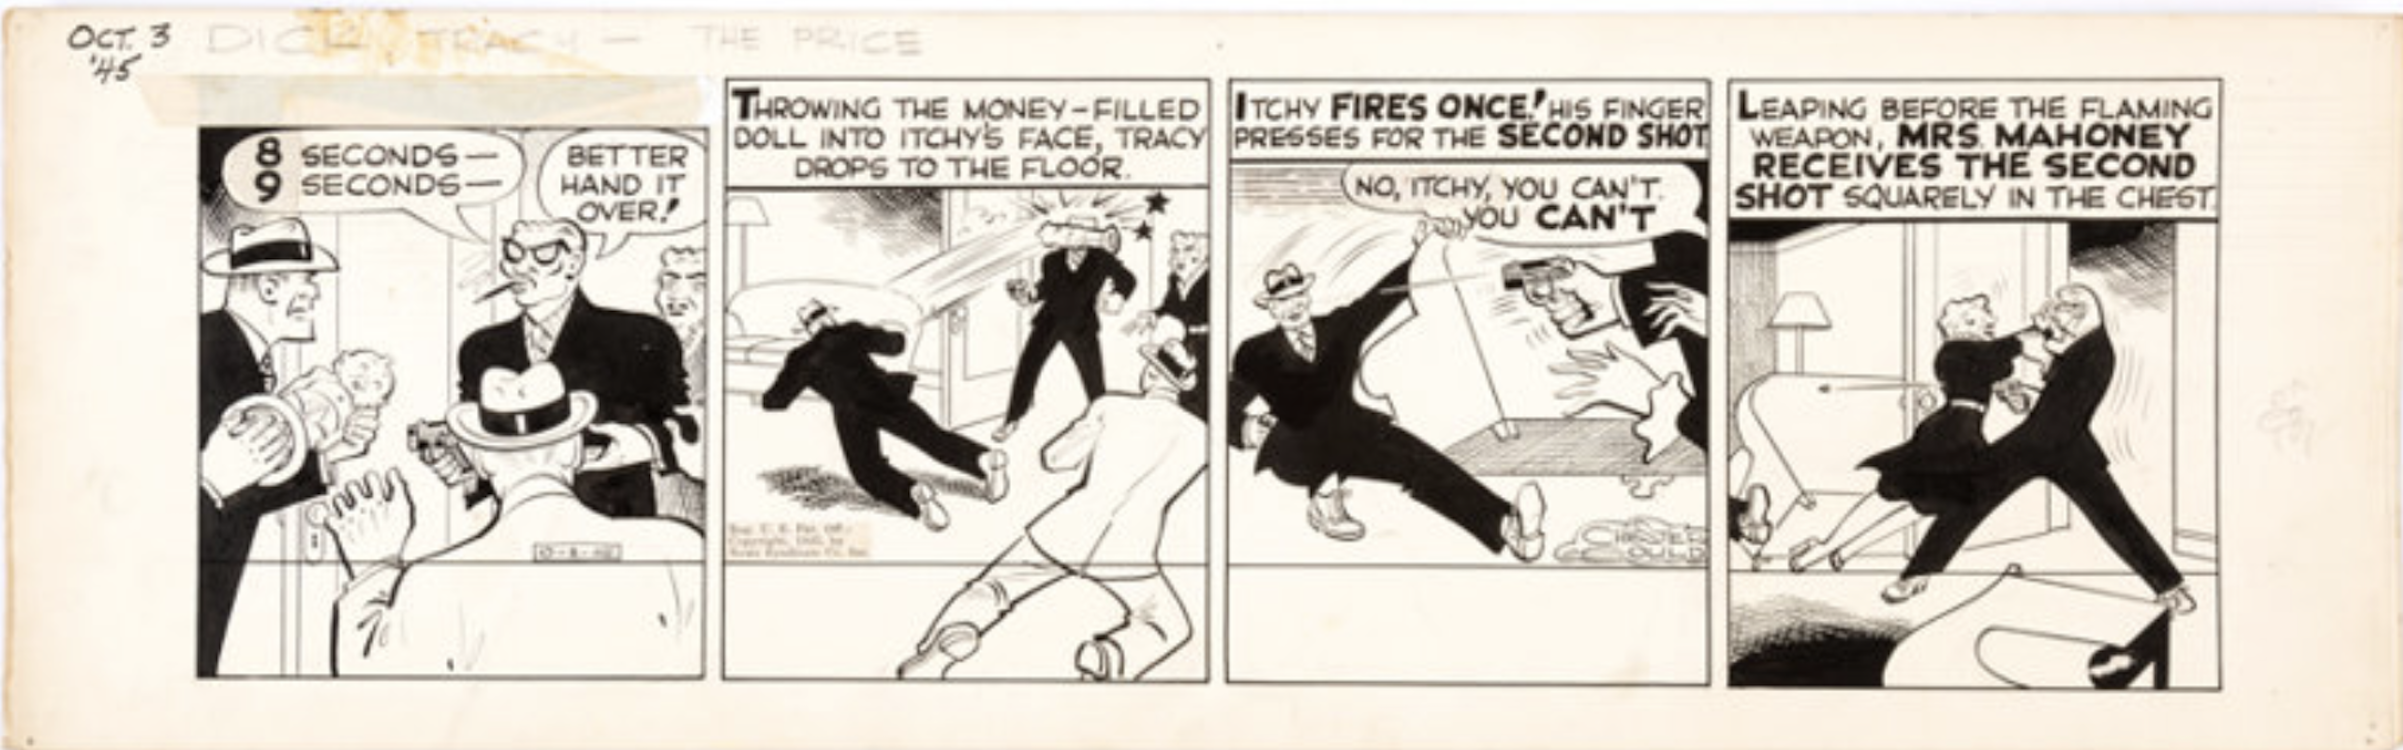 Dick Tracy Daily Comic Strip 10-3-45 by Chester Gould sold for $6,600. Click here to get your original art appraised.